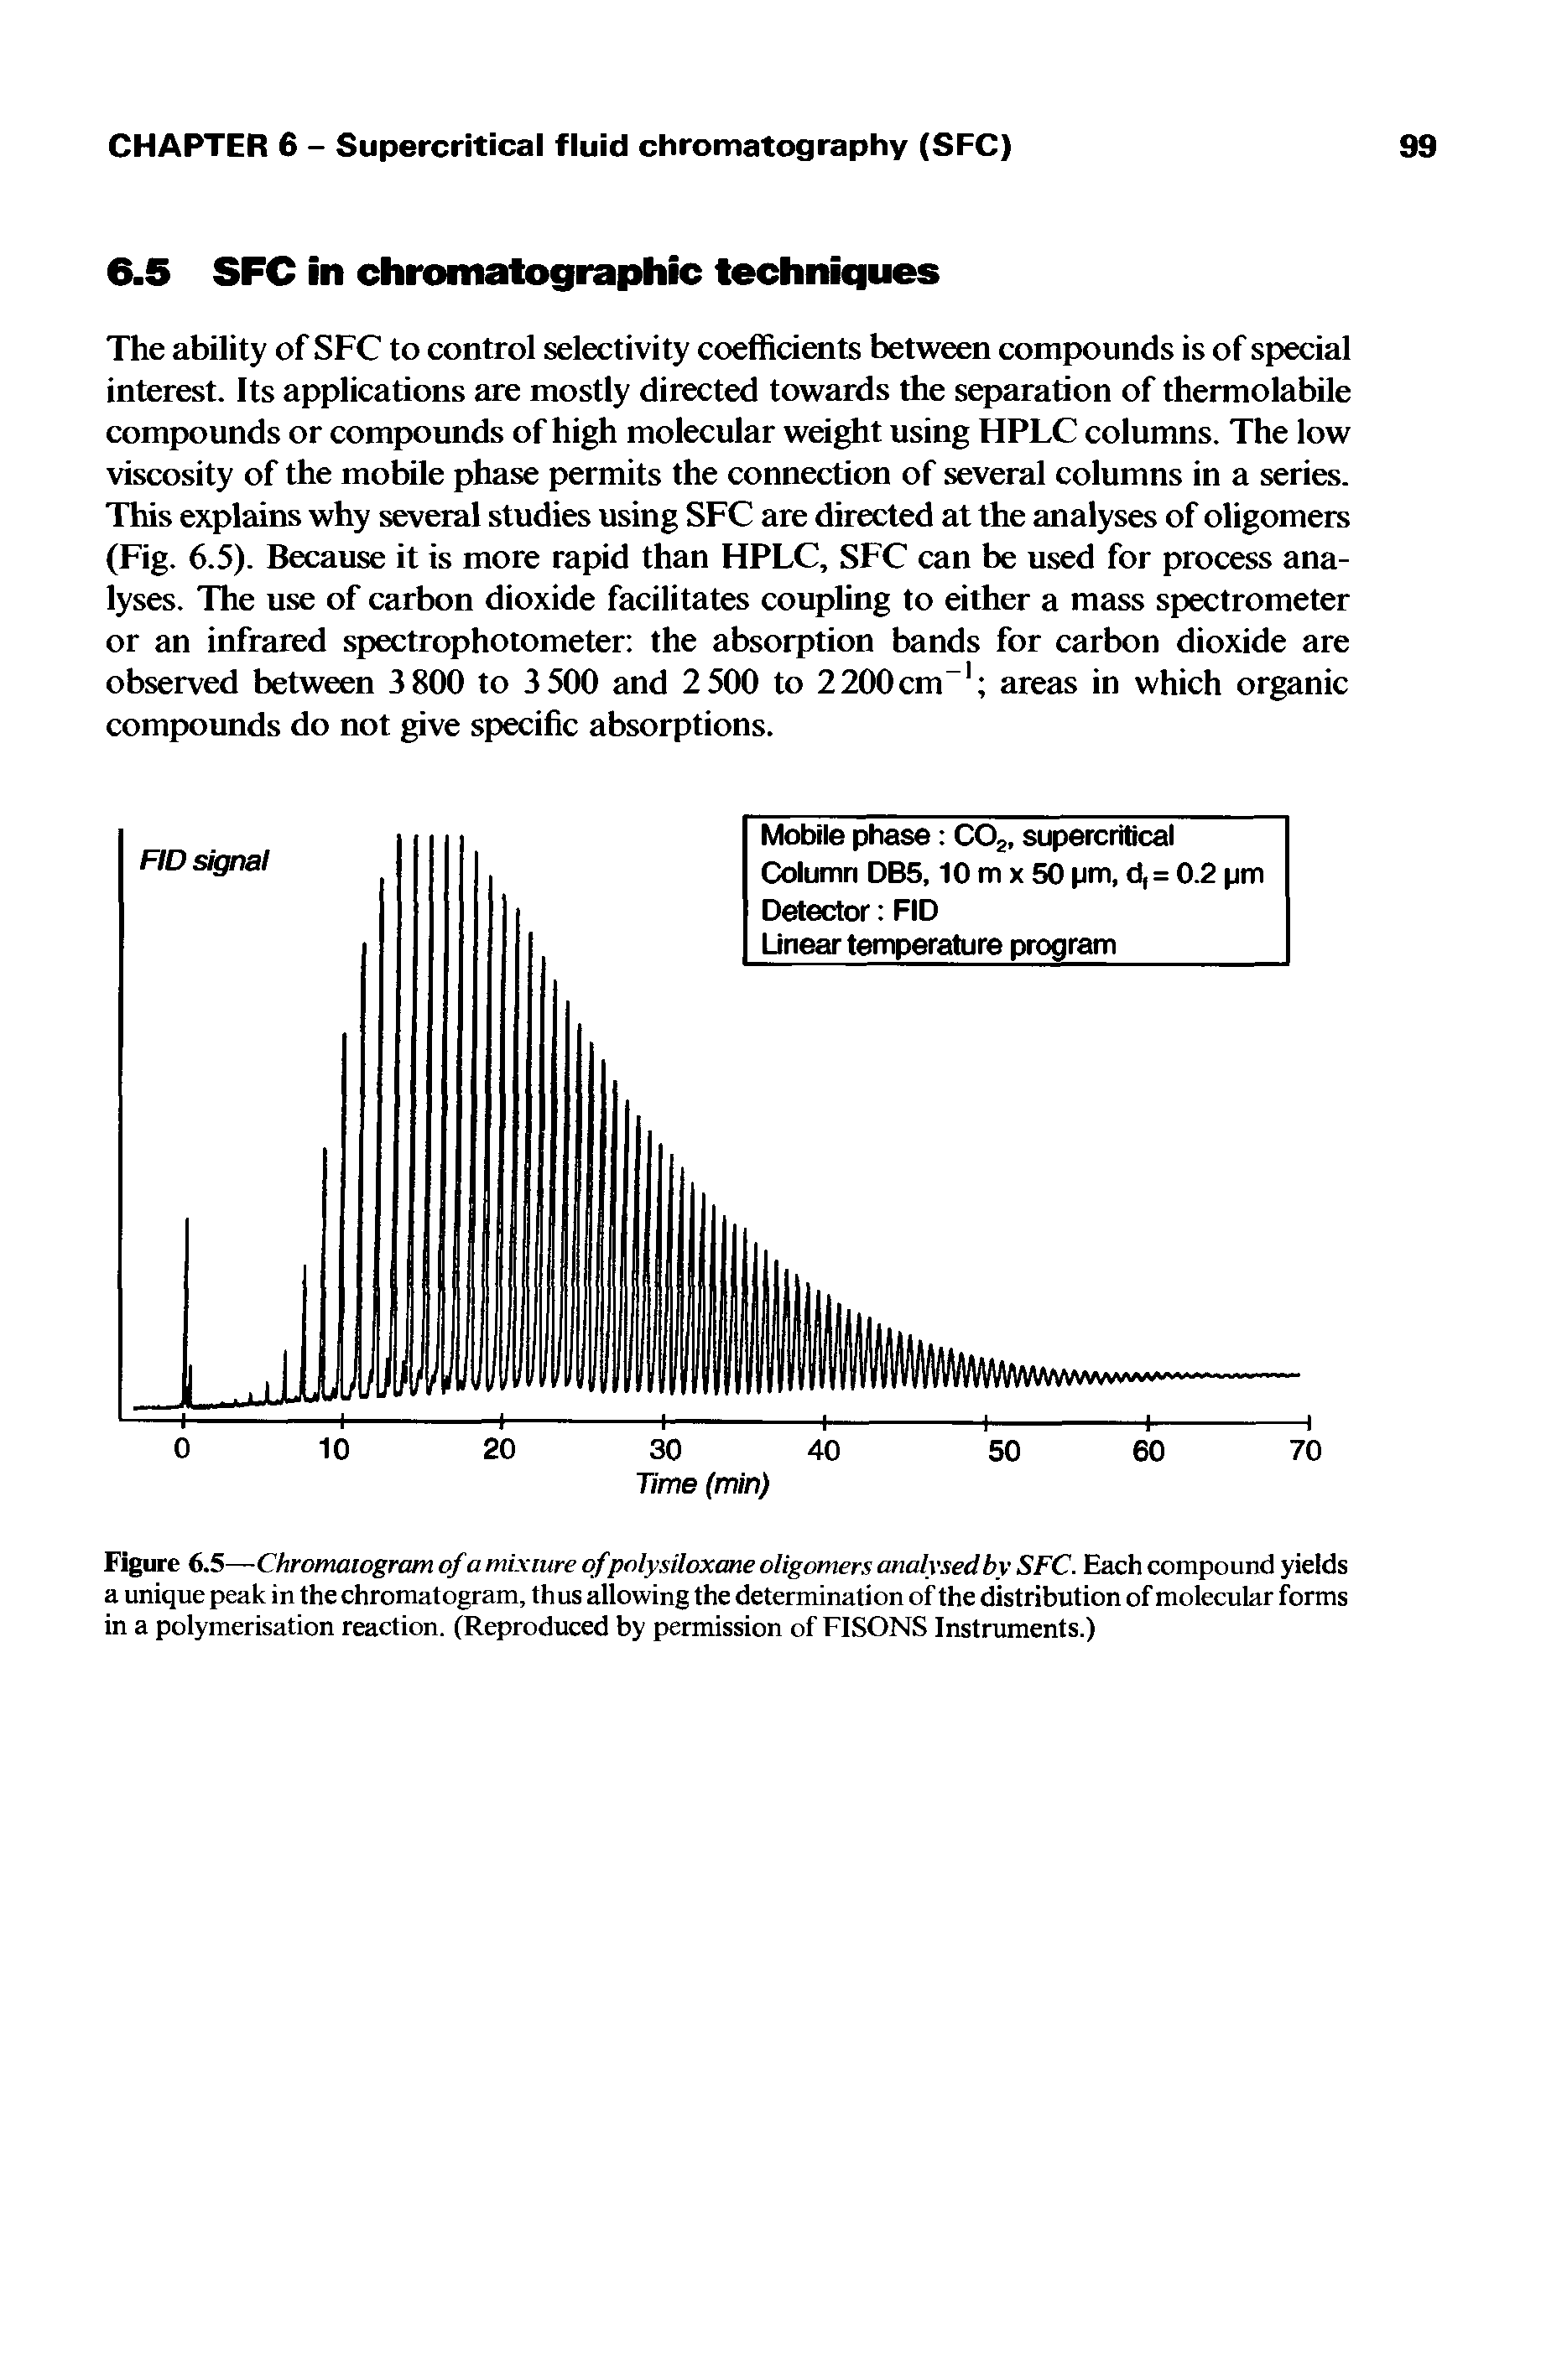 Figure 6.5—Chromatogram of a mixture ofpolysiloxane oligomers analysed by SFC. Each compound yields a unique peak in the chromatogram, thus allowing the determination of the distribution of molecular forms in a polymerisation reaction. (Reproduced by permission of FISONS Instruments.)...